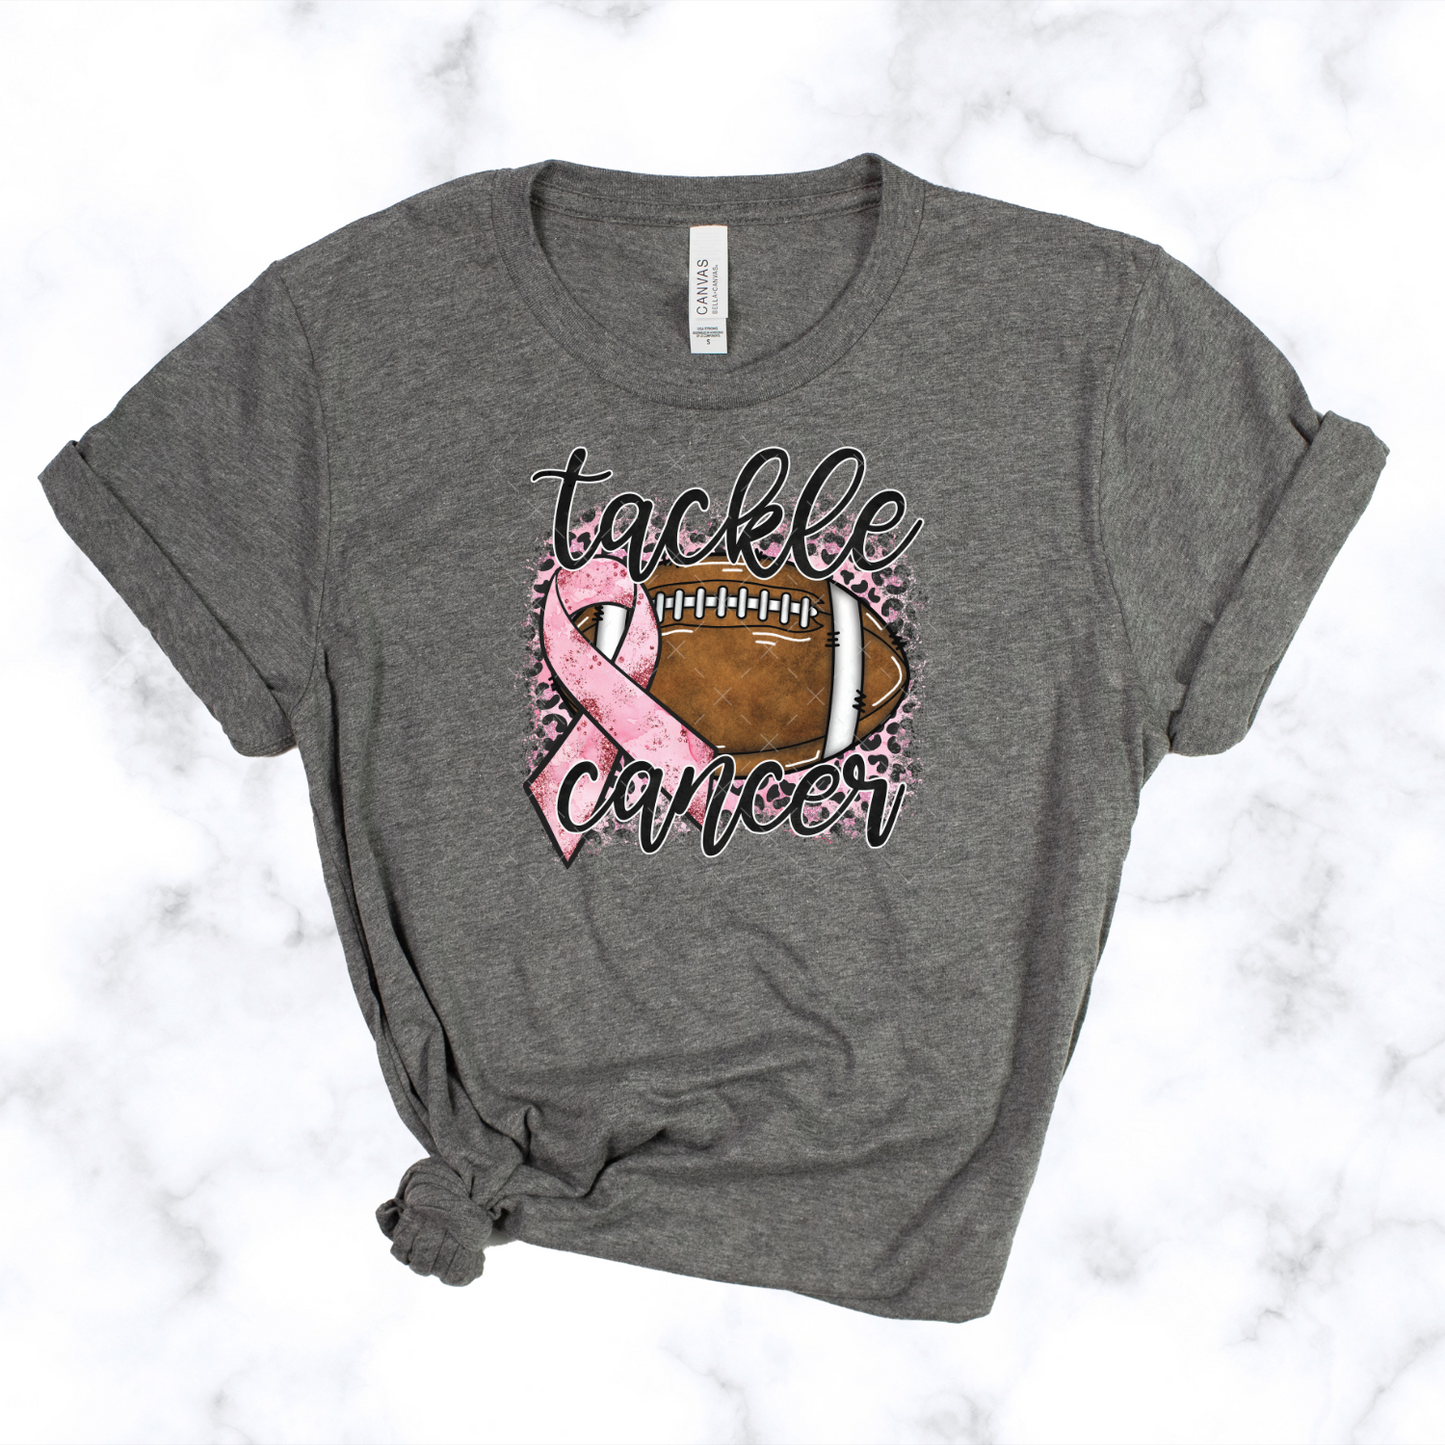 Tackle Cancer Tee Youth